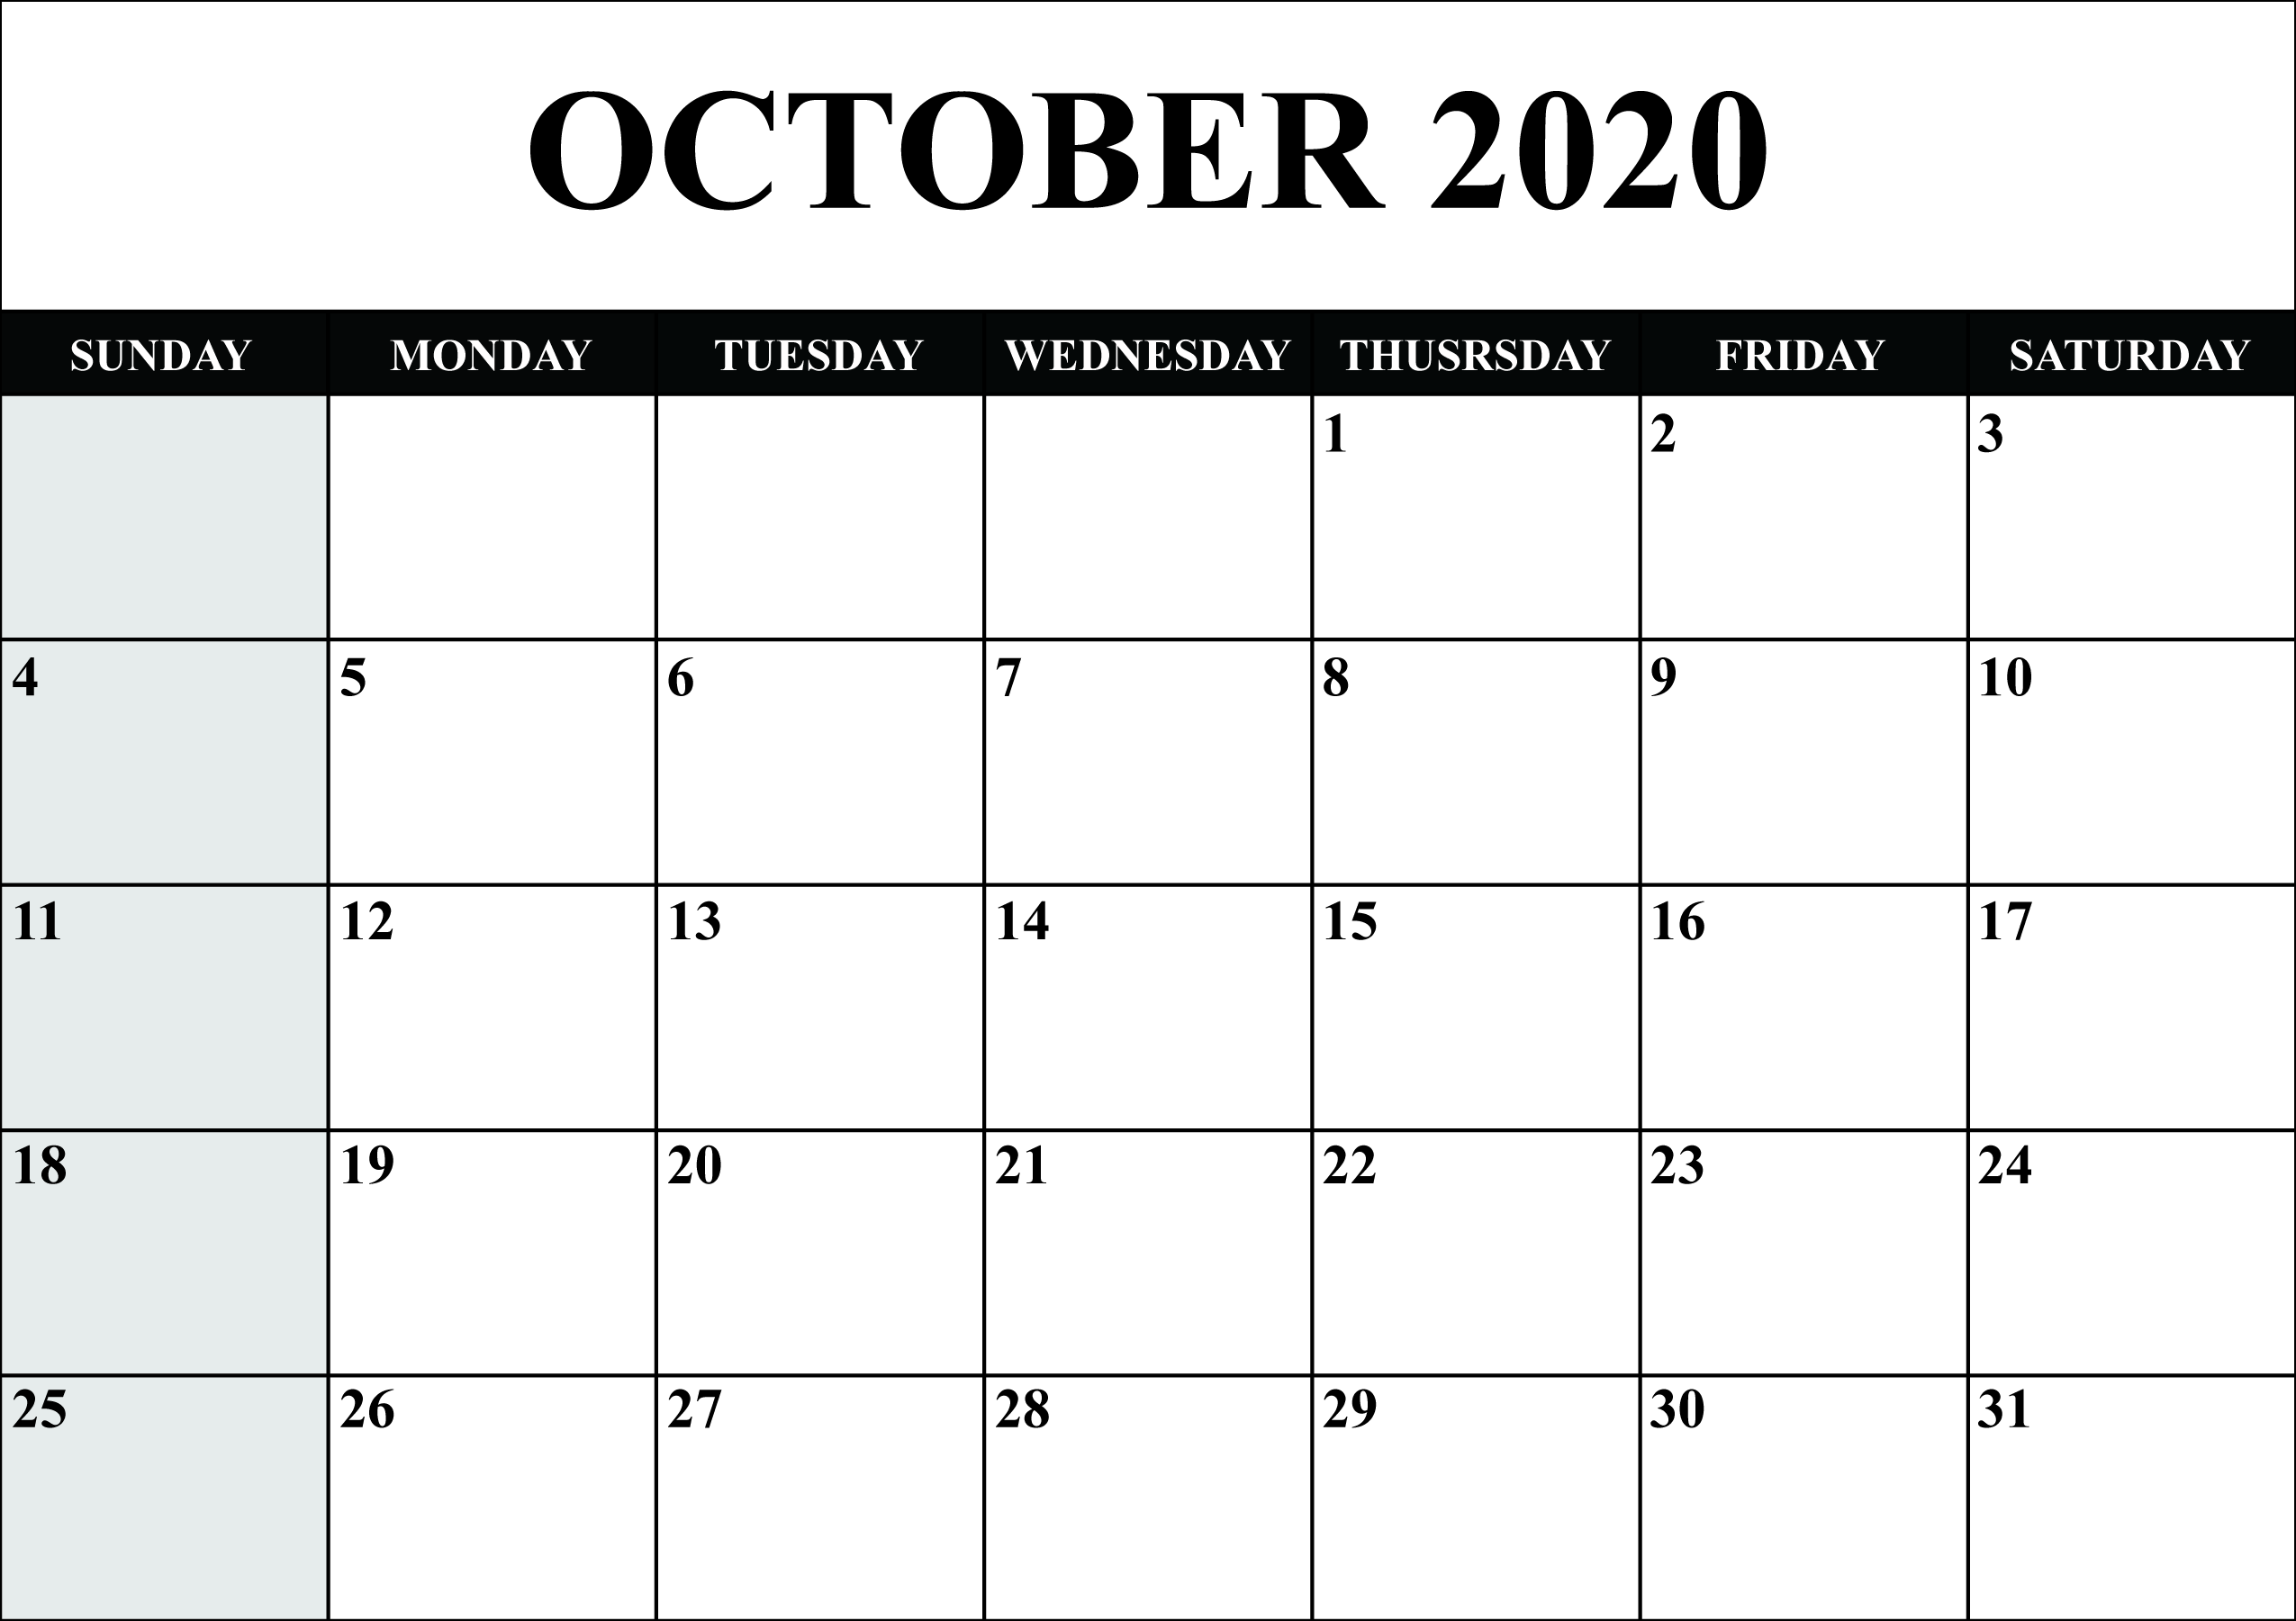 Calendar for October 2020. Monthly Calendars. Monthly